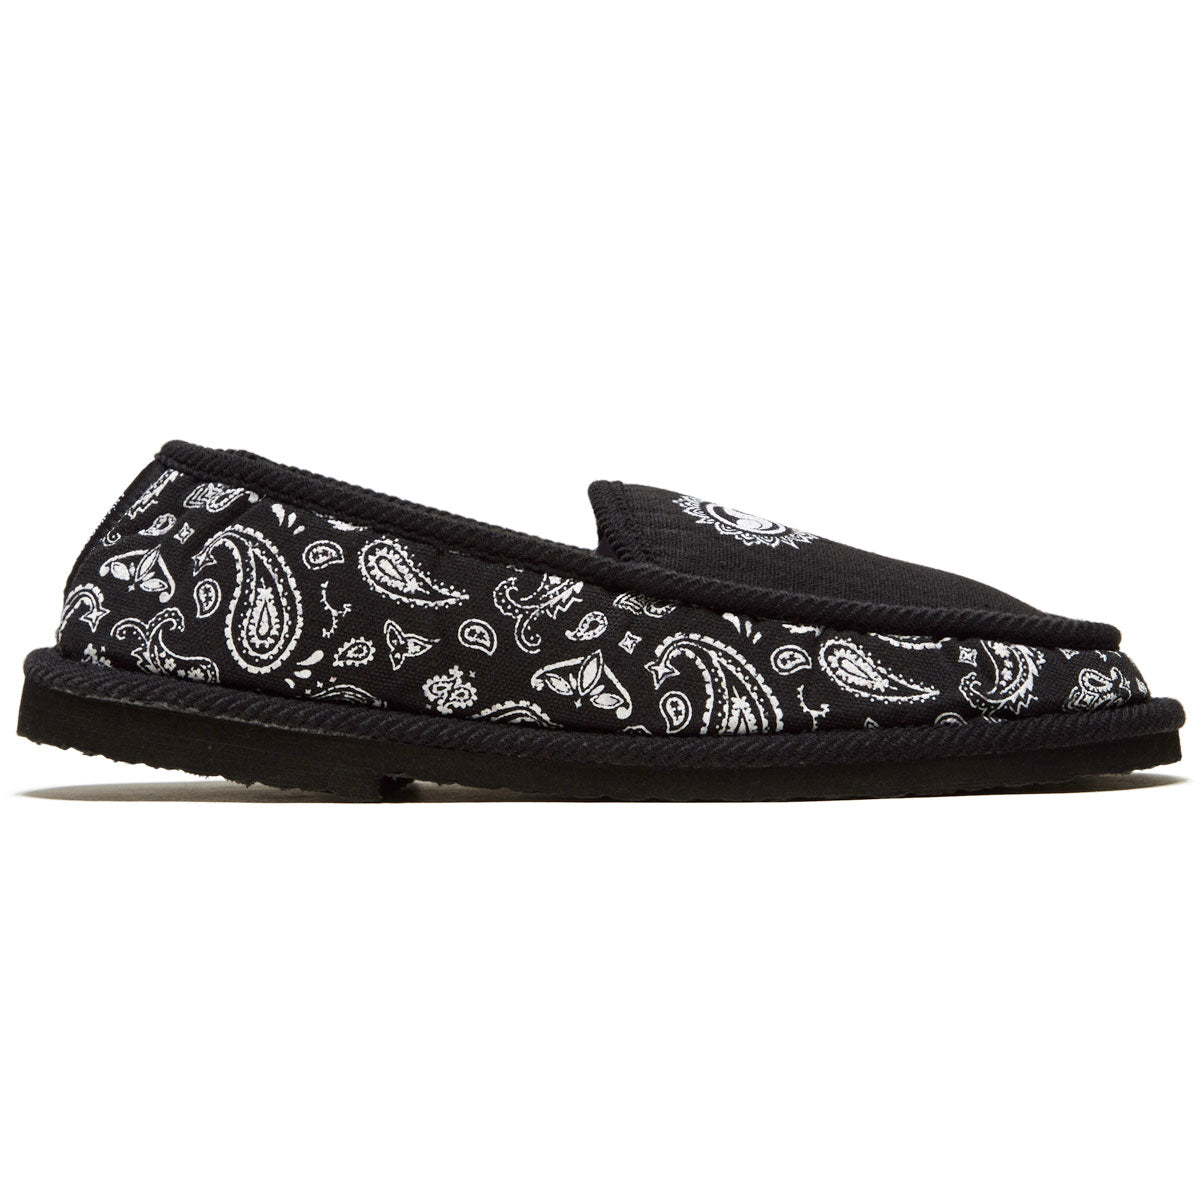 DVS Francisco Slippers - Black/White Printed Canvas image 1